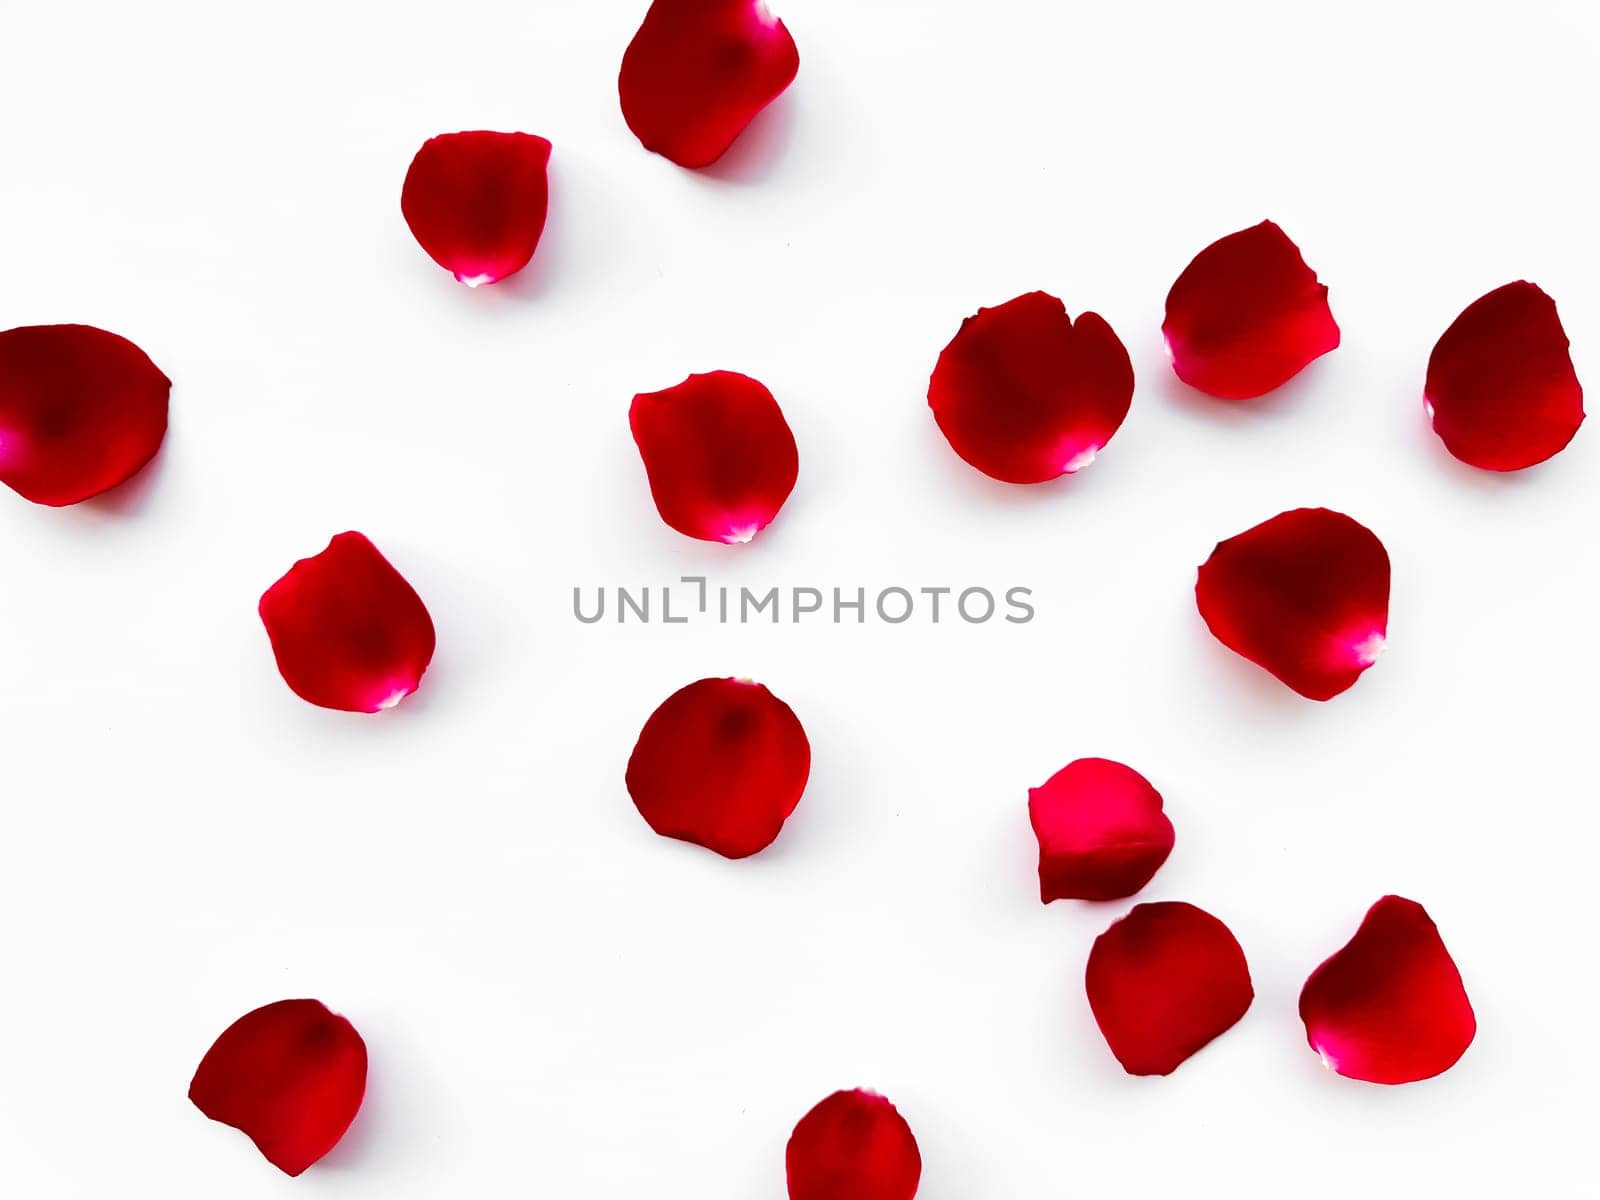 Scattered red rose petals isolated on white background. Flat lay, top view. Romantic concept for design and decoration. Can be used for romantic event decorations, wedding invitations, greeting cards and in cosmetics and perfumery advertising. High quality photo